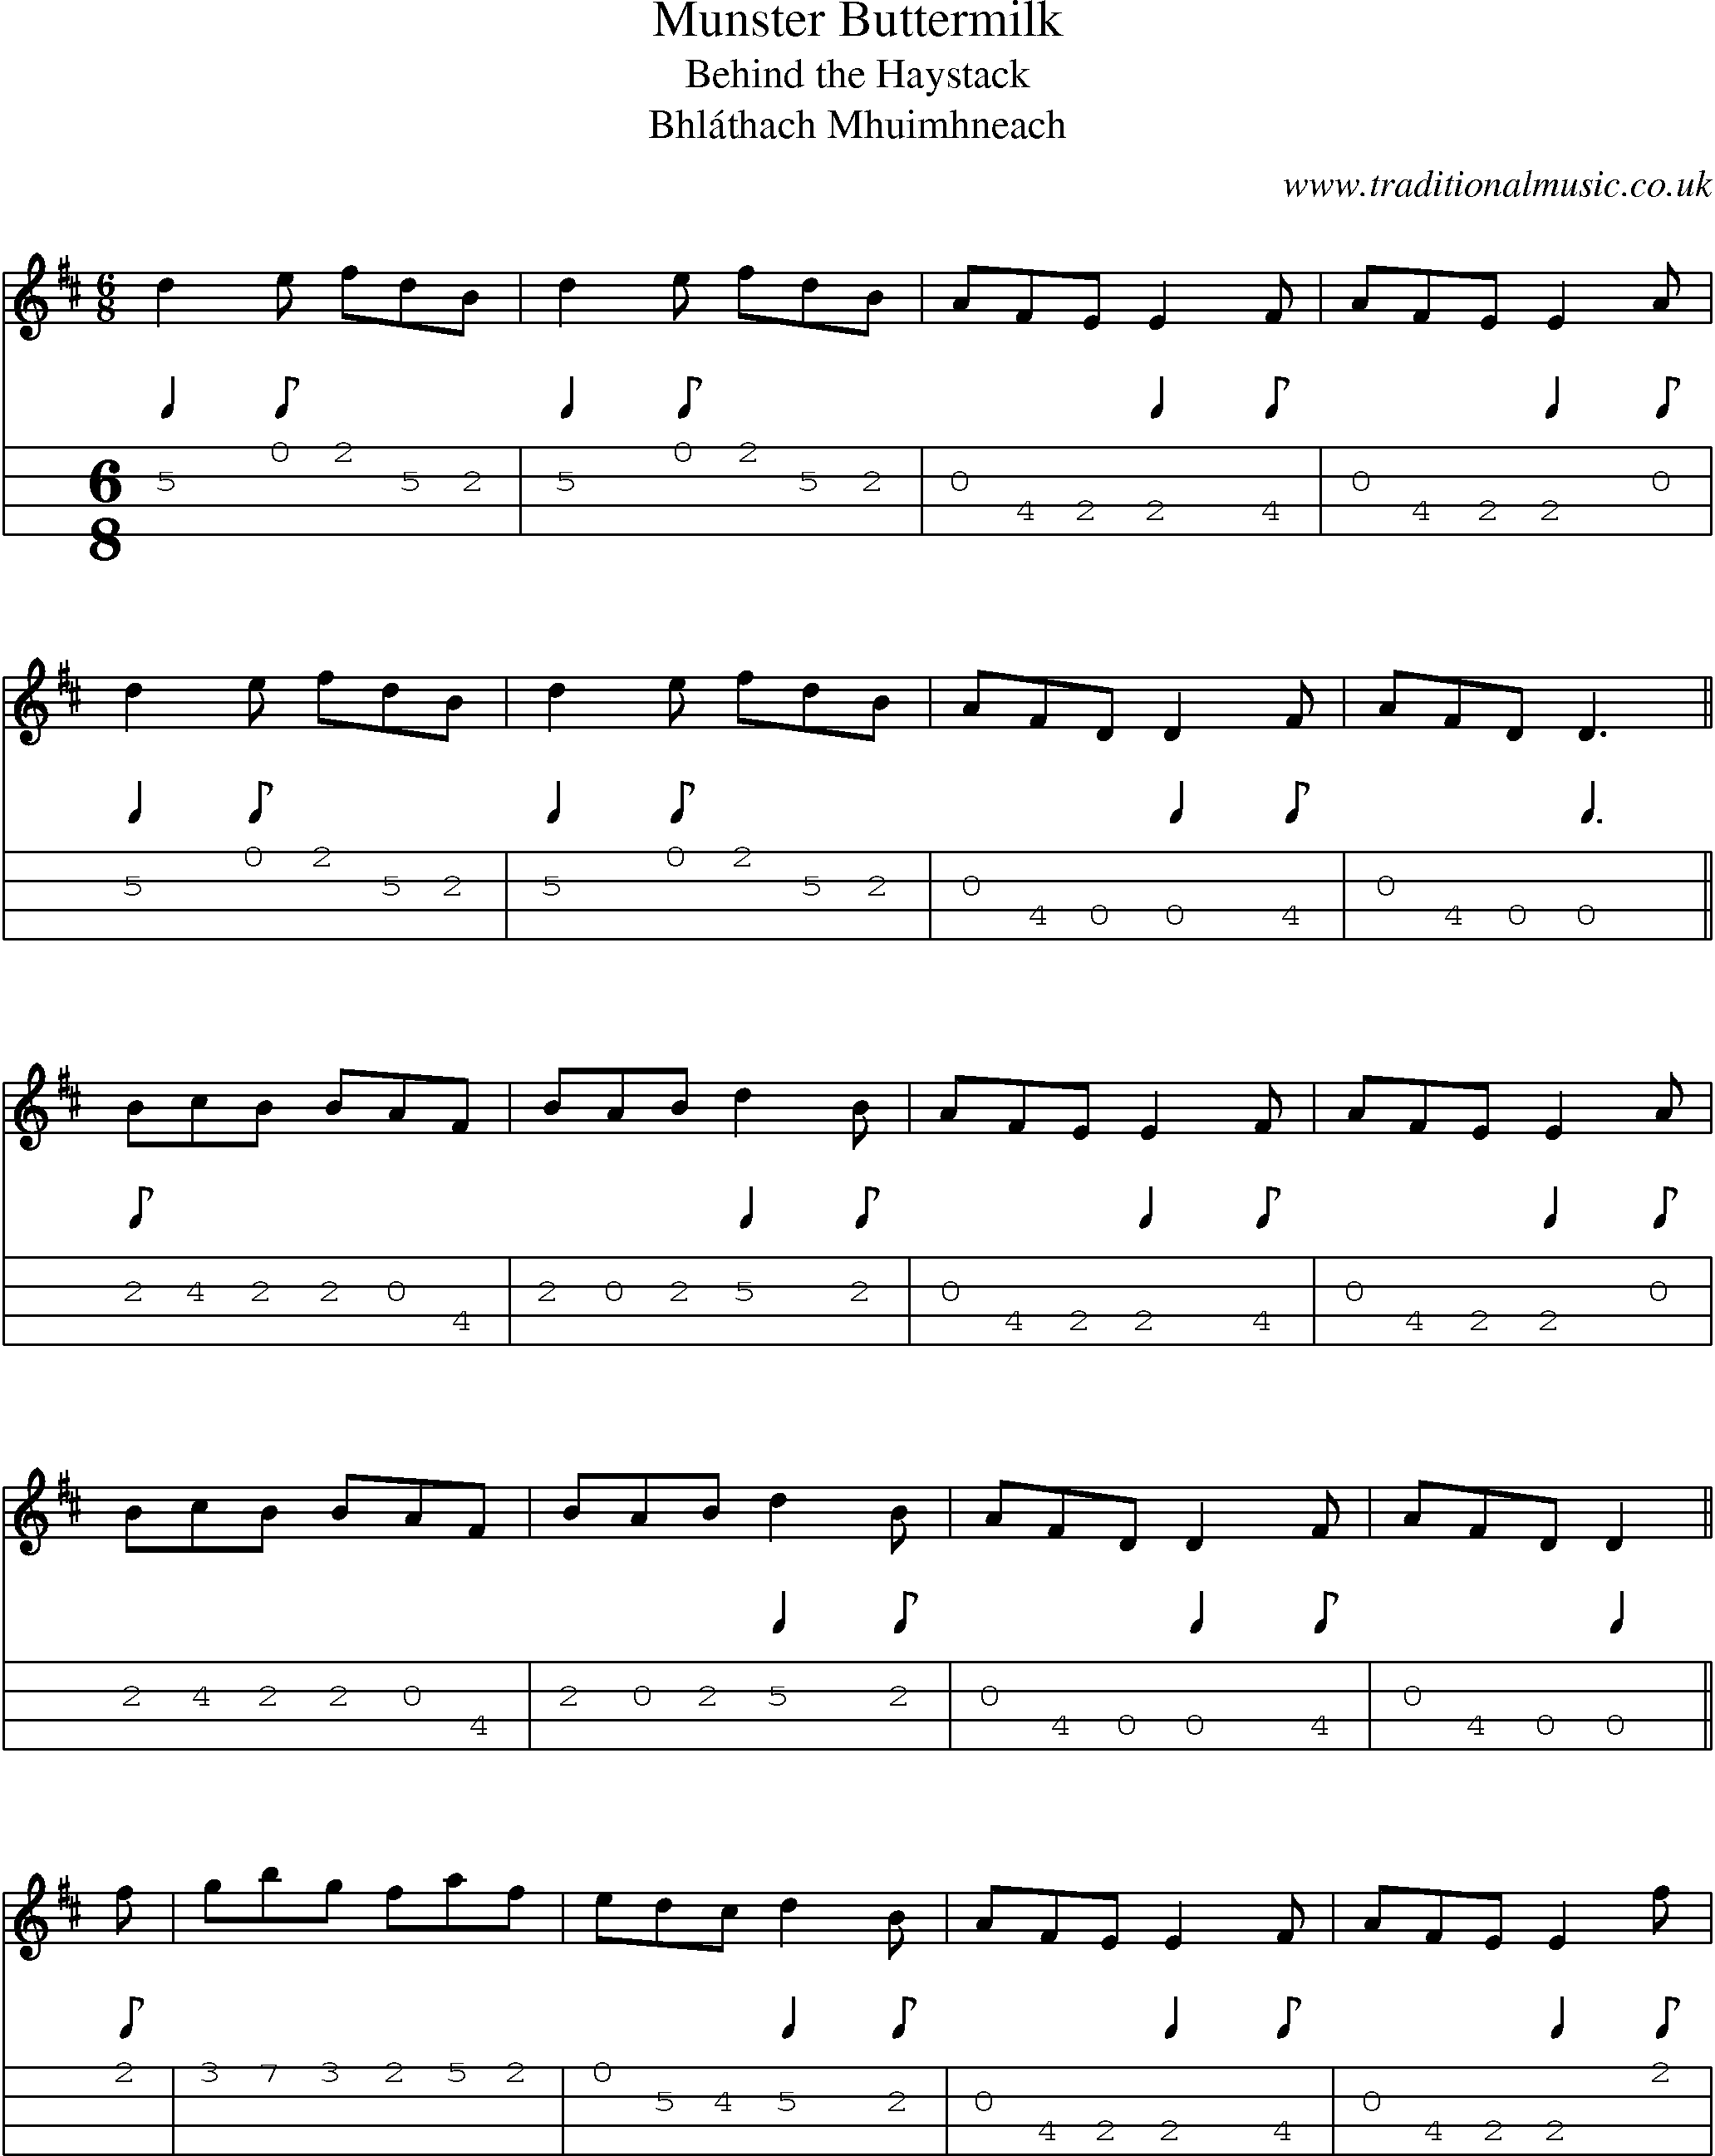 Music Score and Mandolin Tabs for Munster Buttermilk